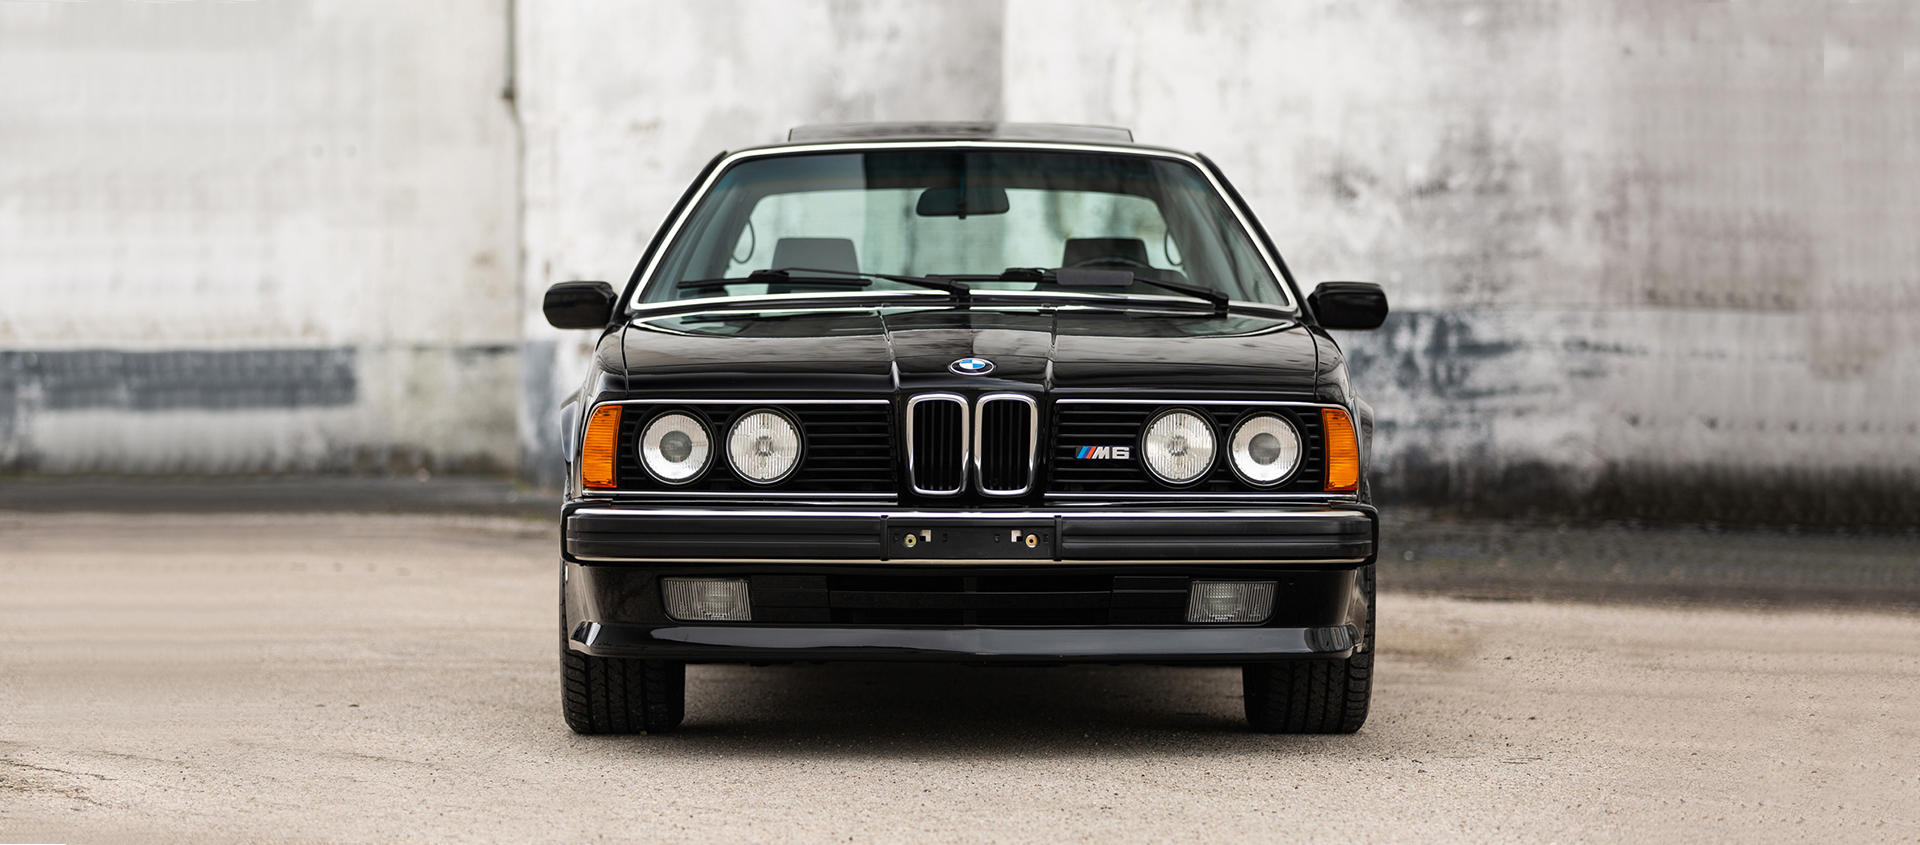 Beautiful and affordable. 1988 BMW M6 image